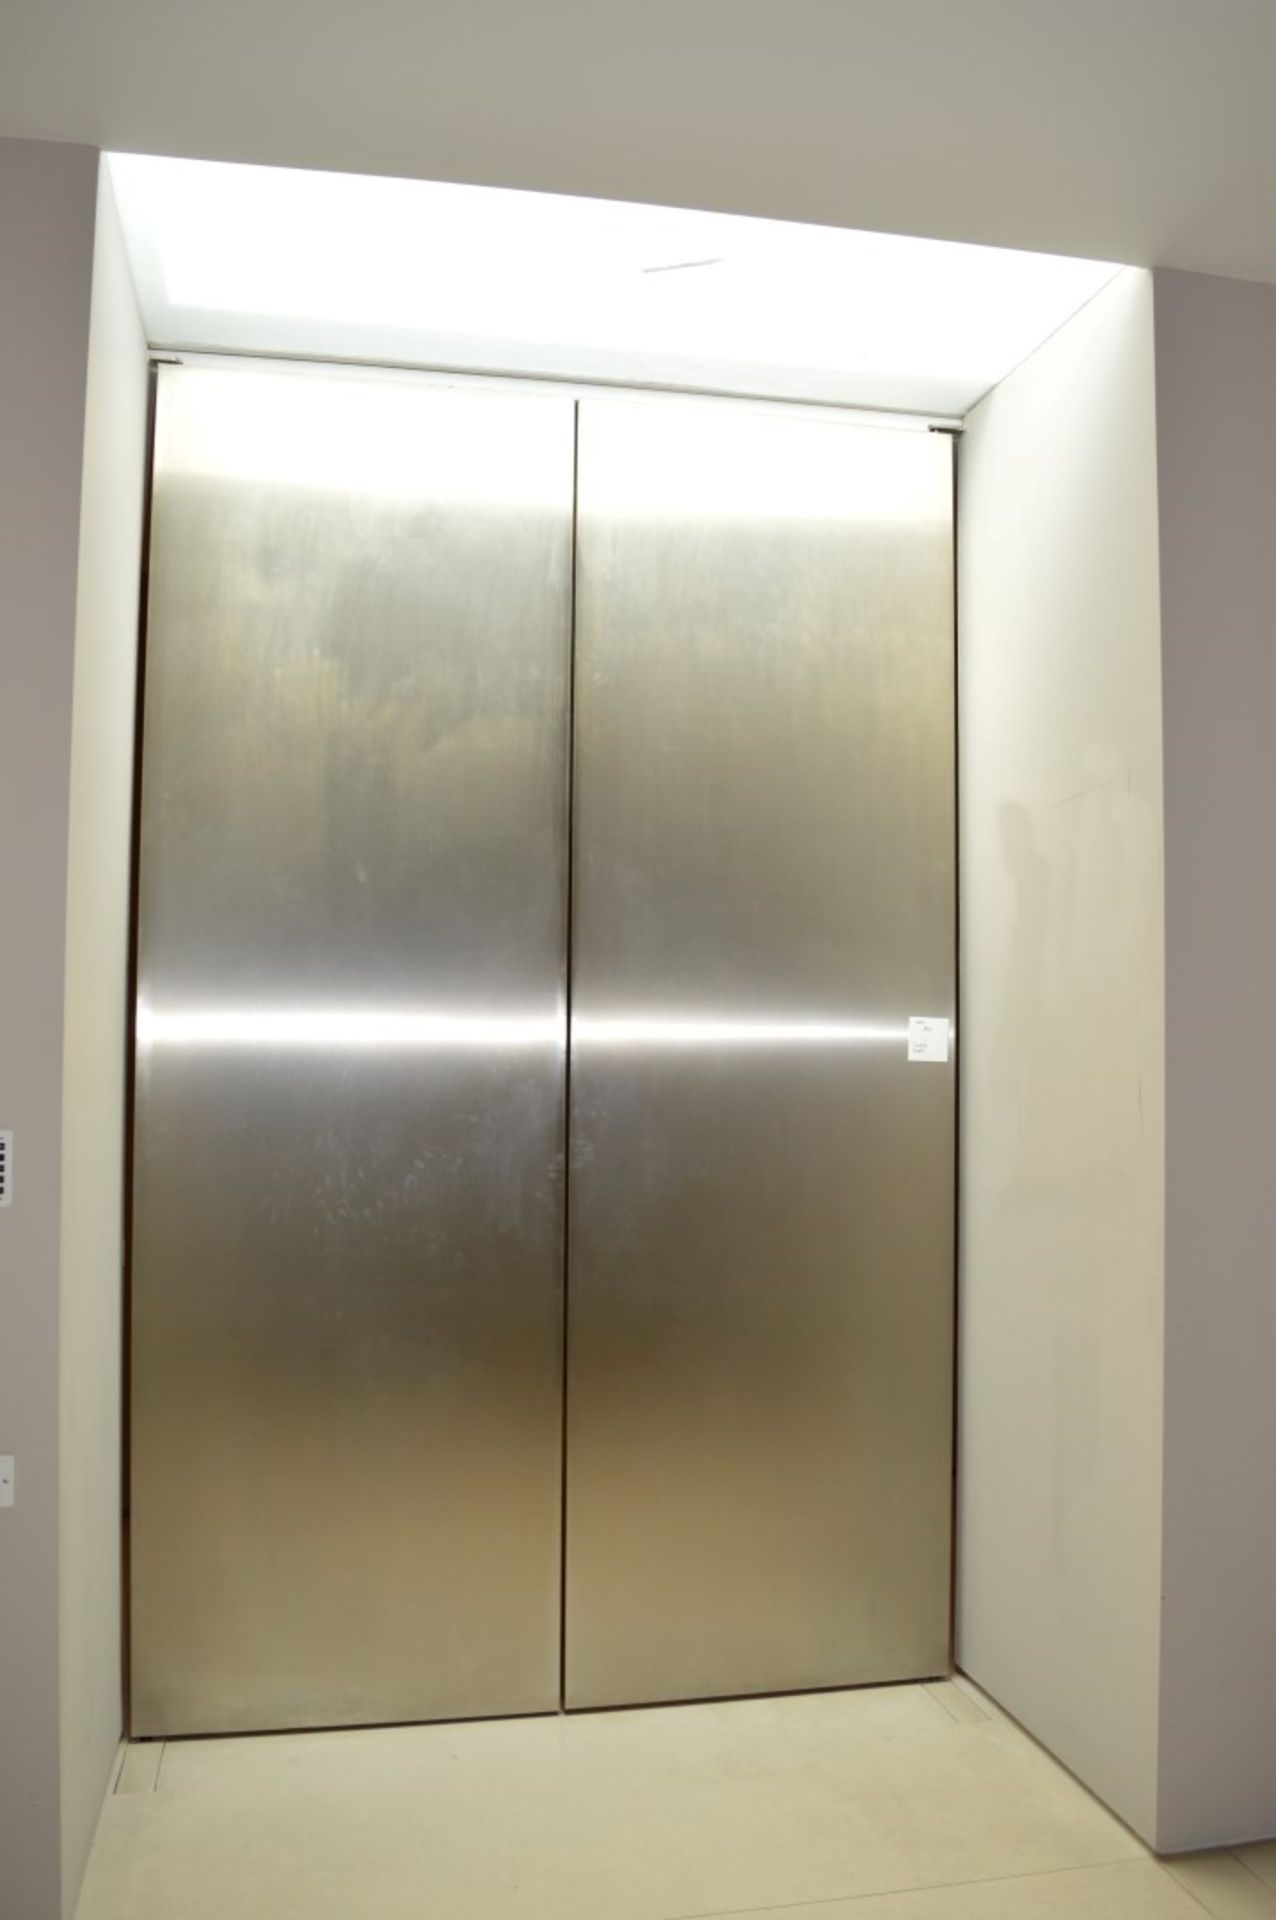 2 x Bespoke Internal Doors With Stainless Steel Finish - Pair of - Large Size - Ideal For Interior - Image 4 of 10